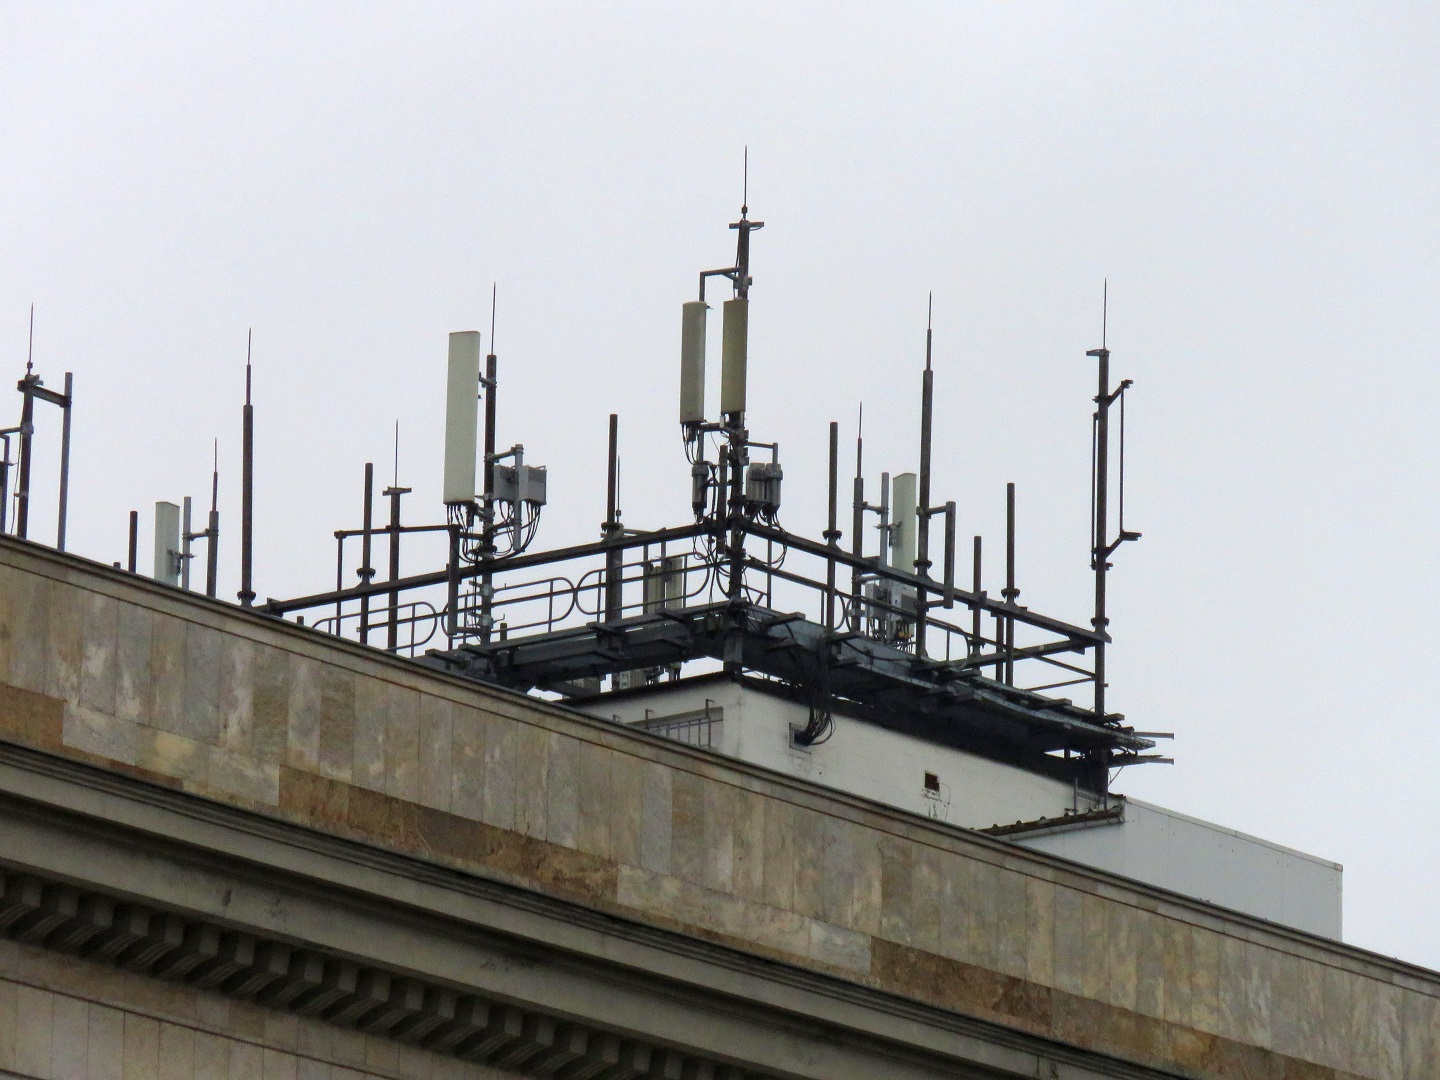 Orange and T-Mobile 4CA site with Huawei, Powerwave, Kathrein antennas and Huawei RRUs.